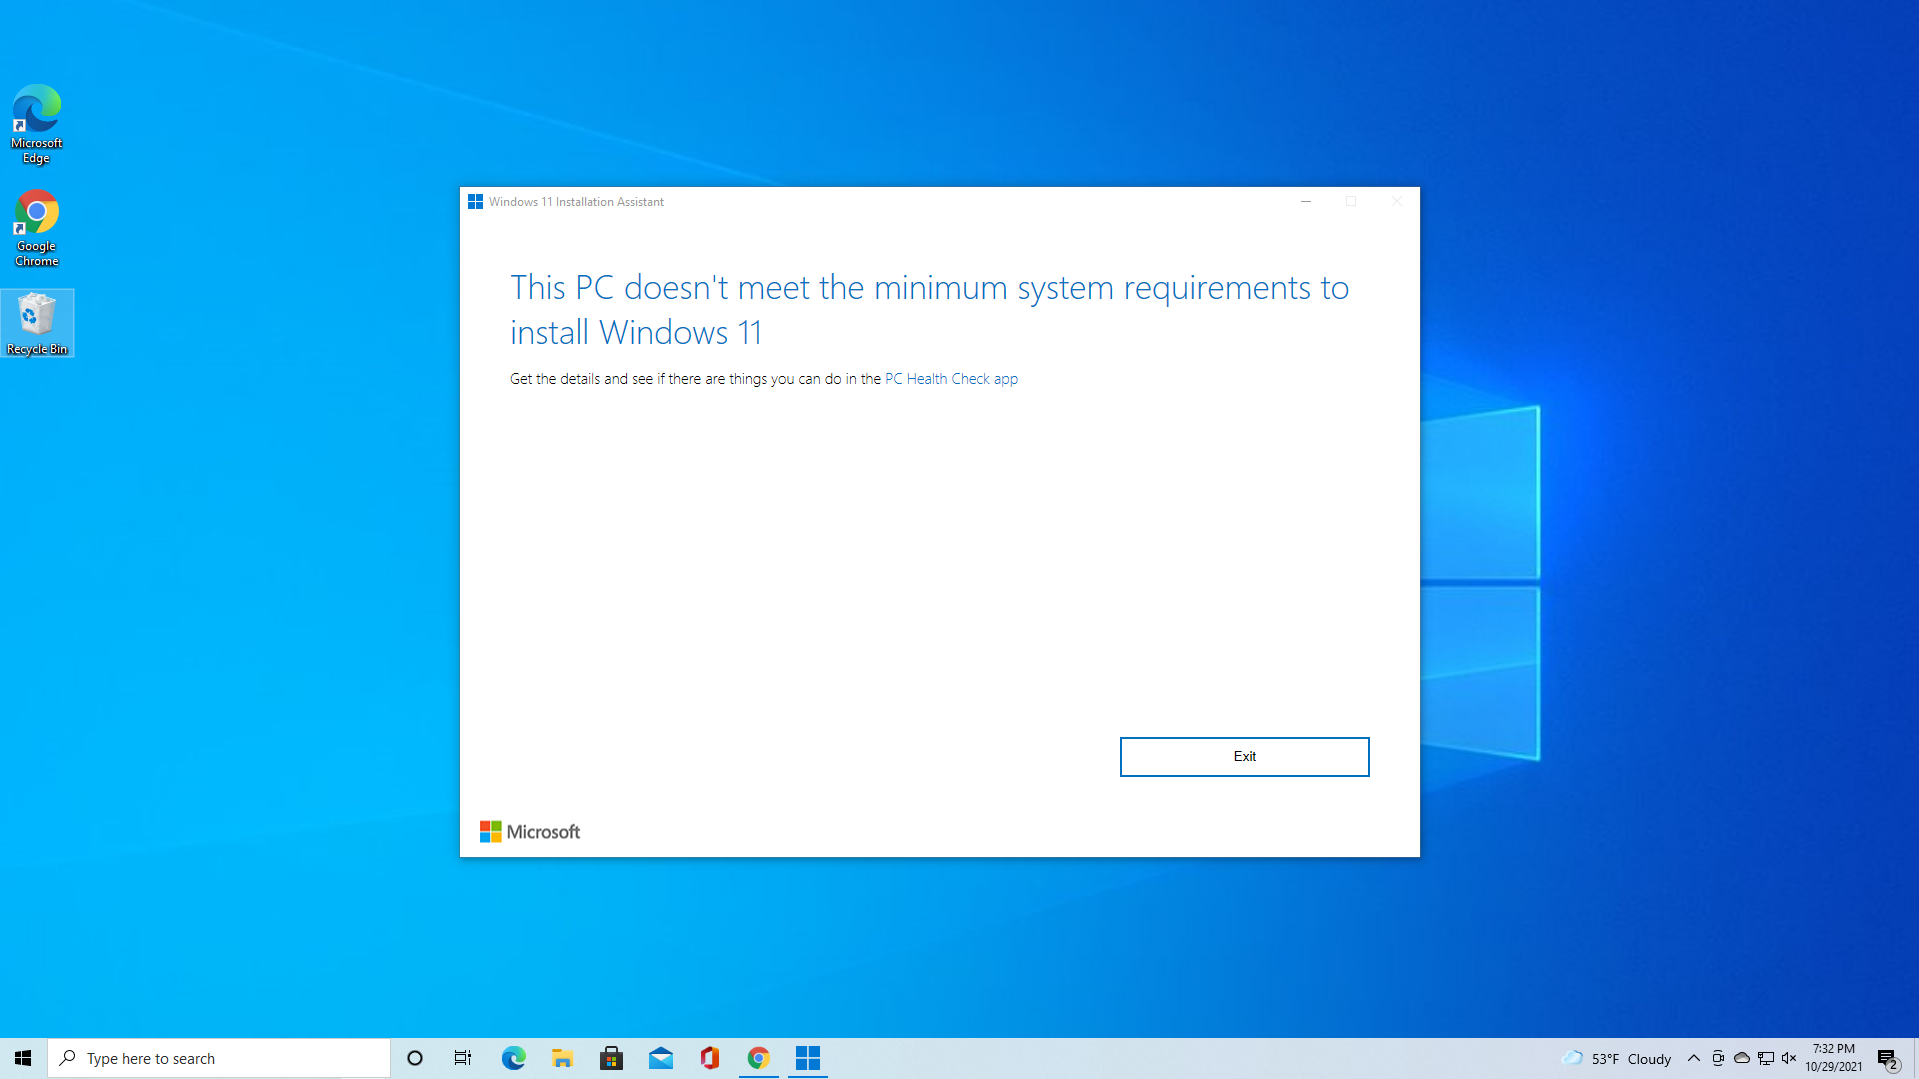 download windows 11 without requirements